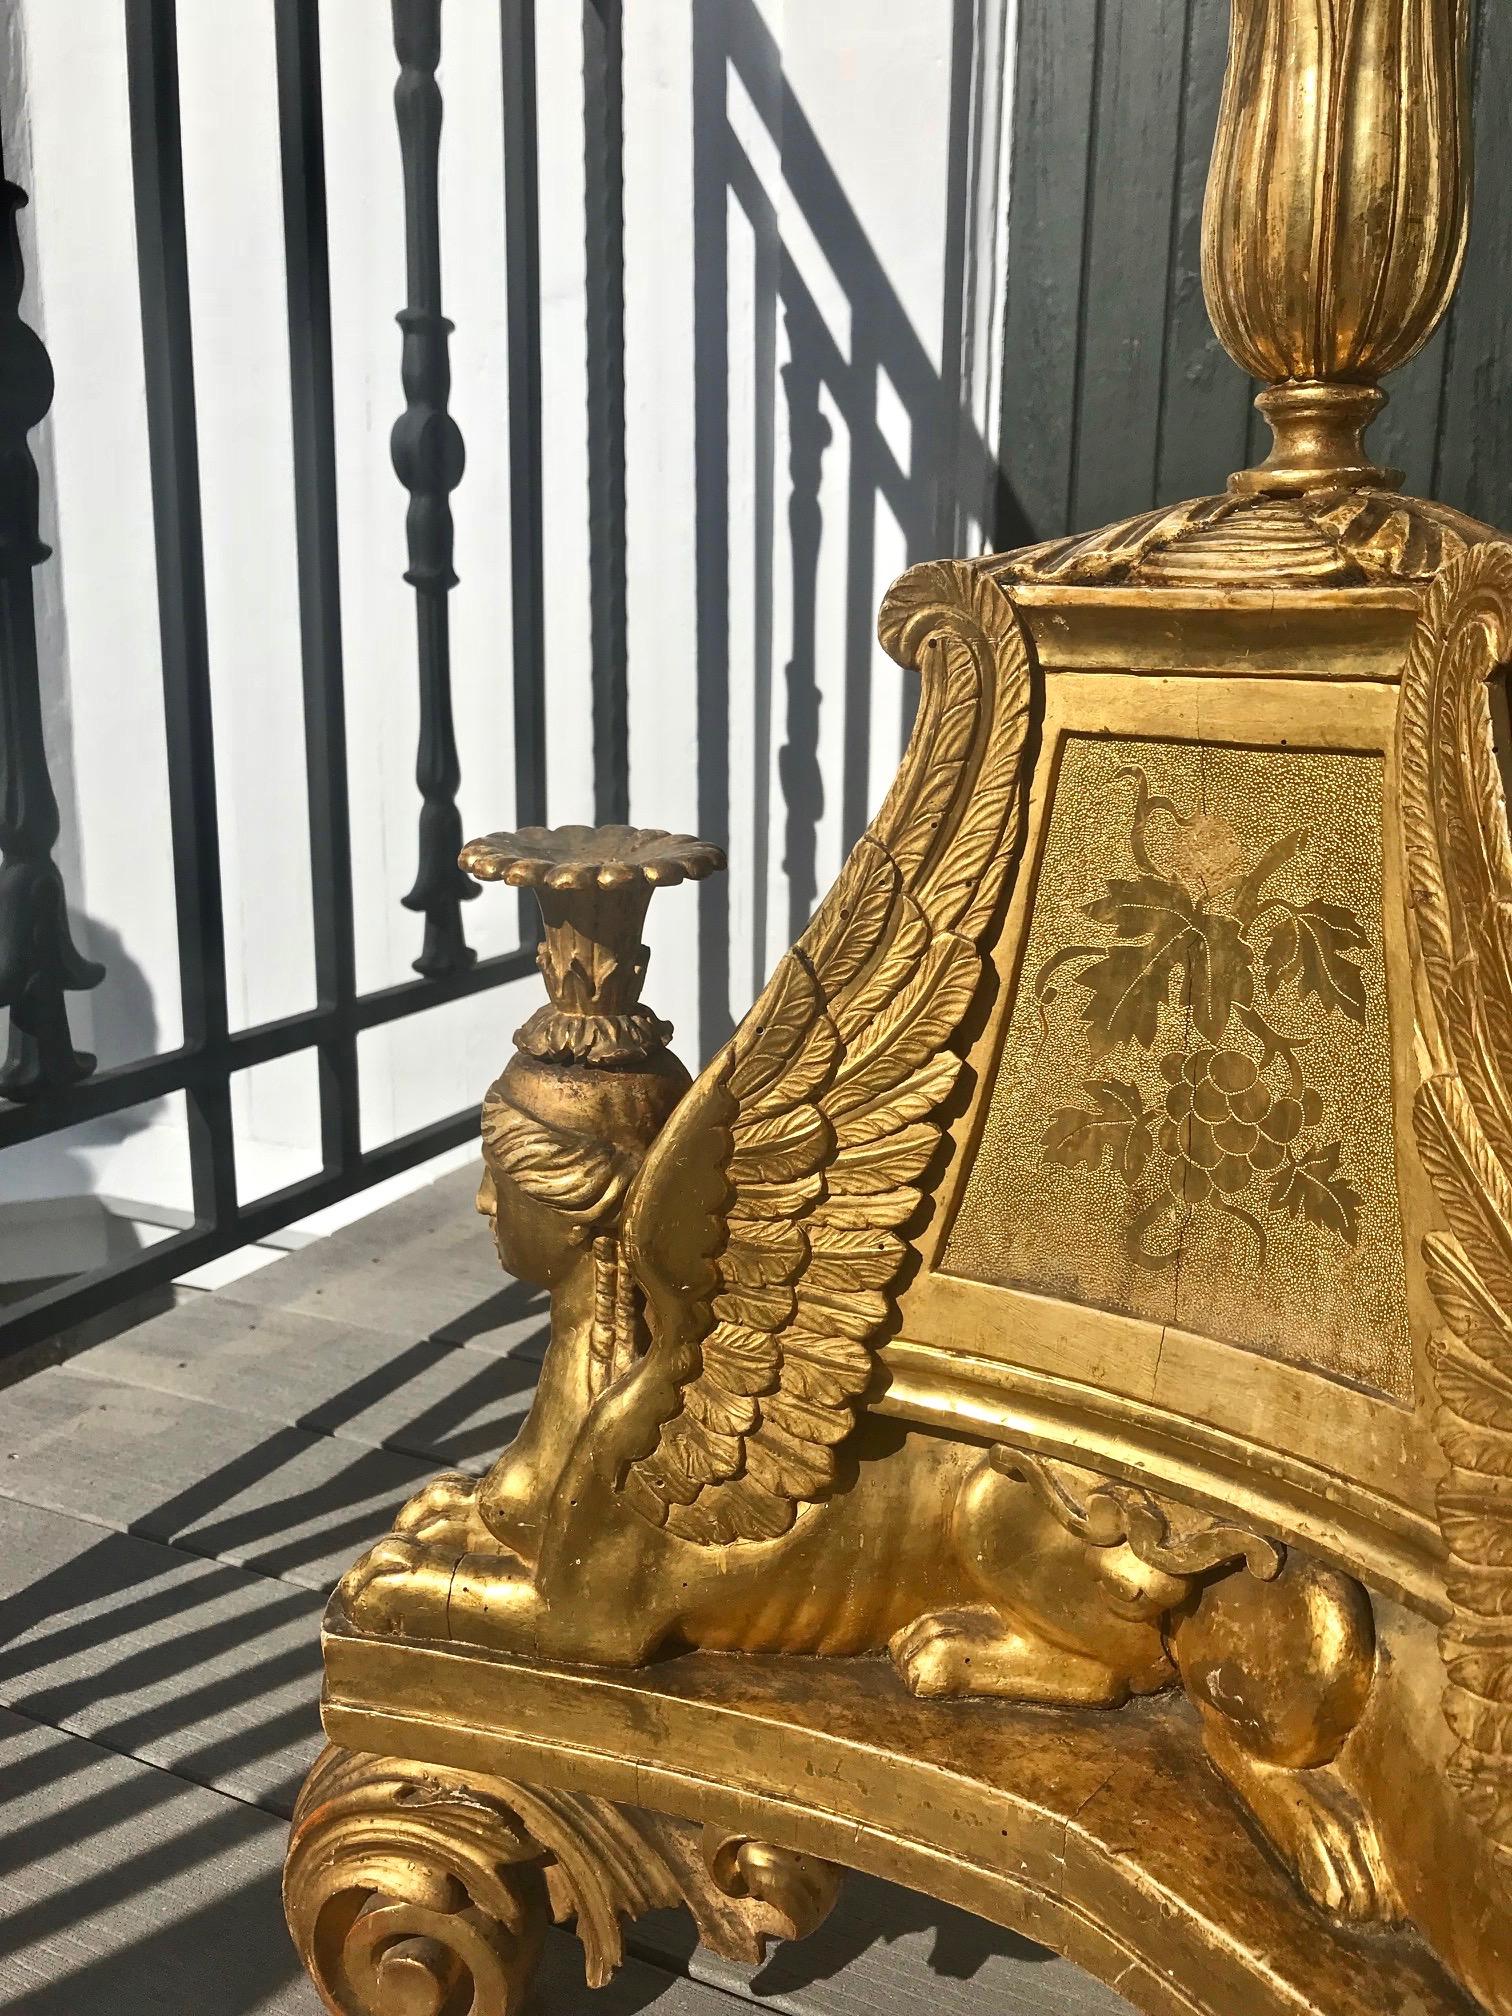 Pair of Gustavian, late 18th century Swedish giltwood neoclassical candelabra or torcheres.

Corner form giltwood candelabra with winged sphinx motif and foliate candleholders. Nile Representation and all original throughout.

Have custom-made